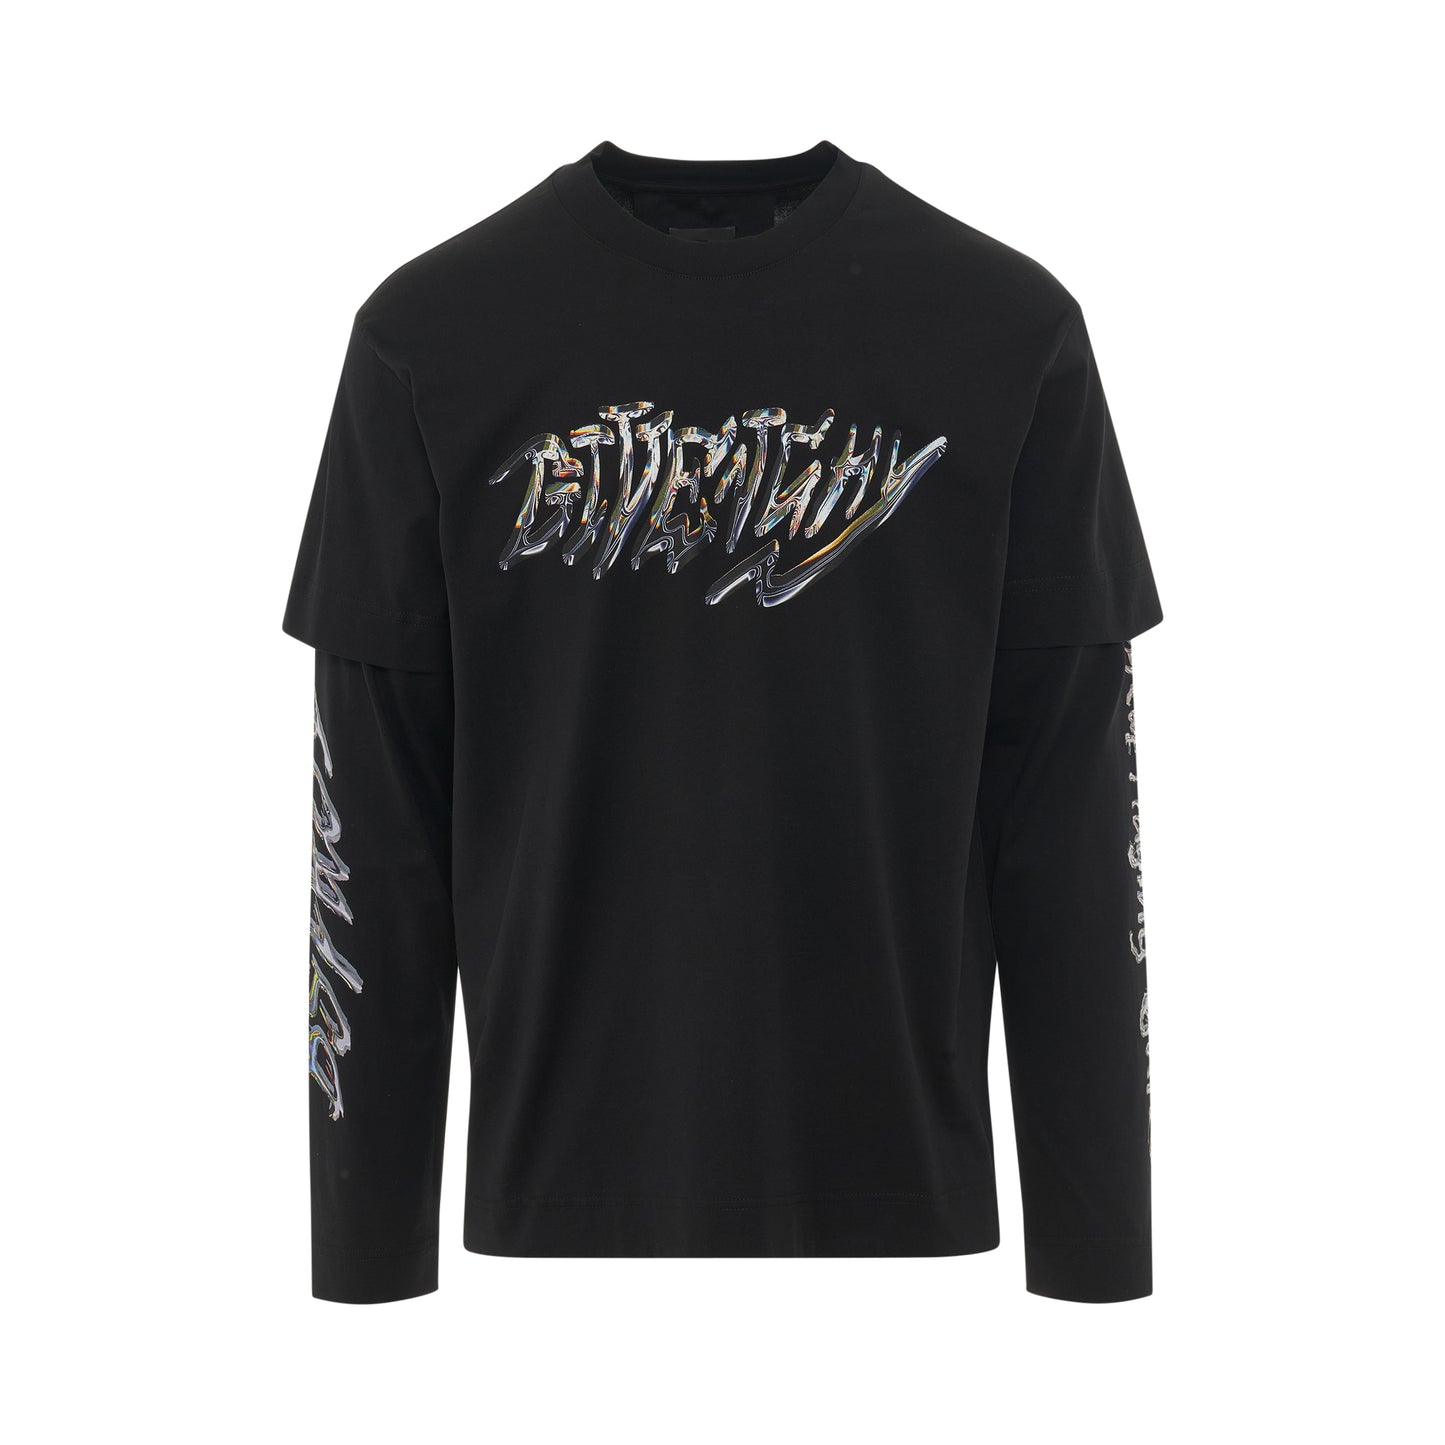 BSTROY 4G T-Shirt in Black